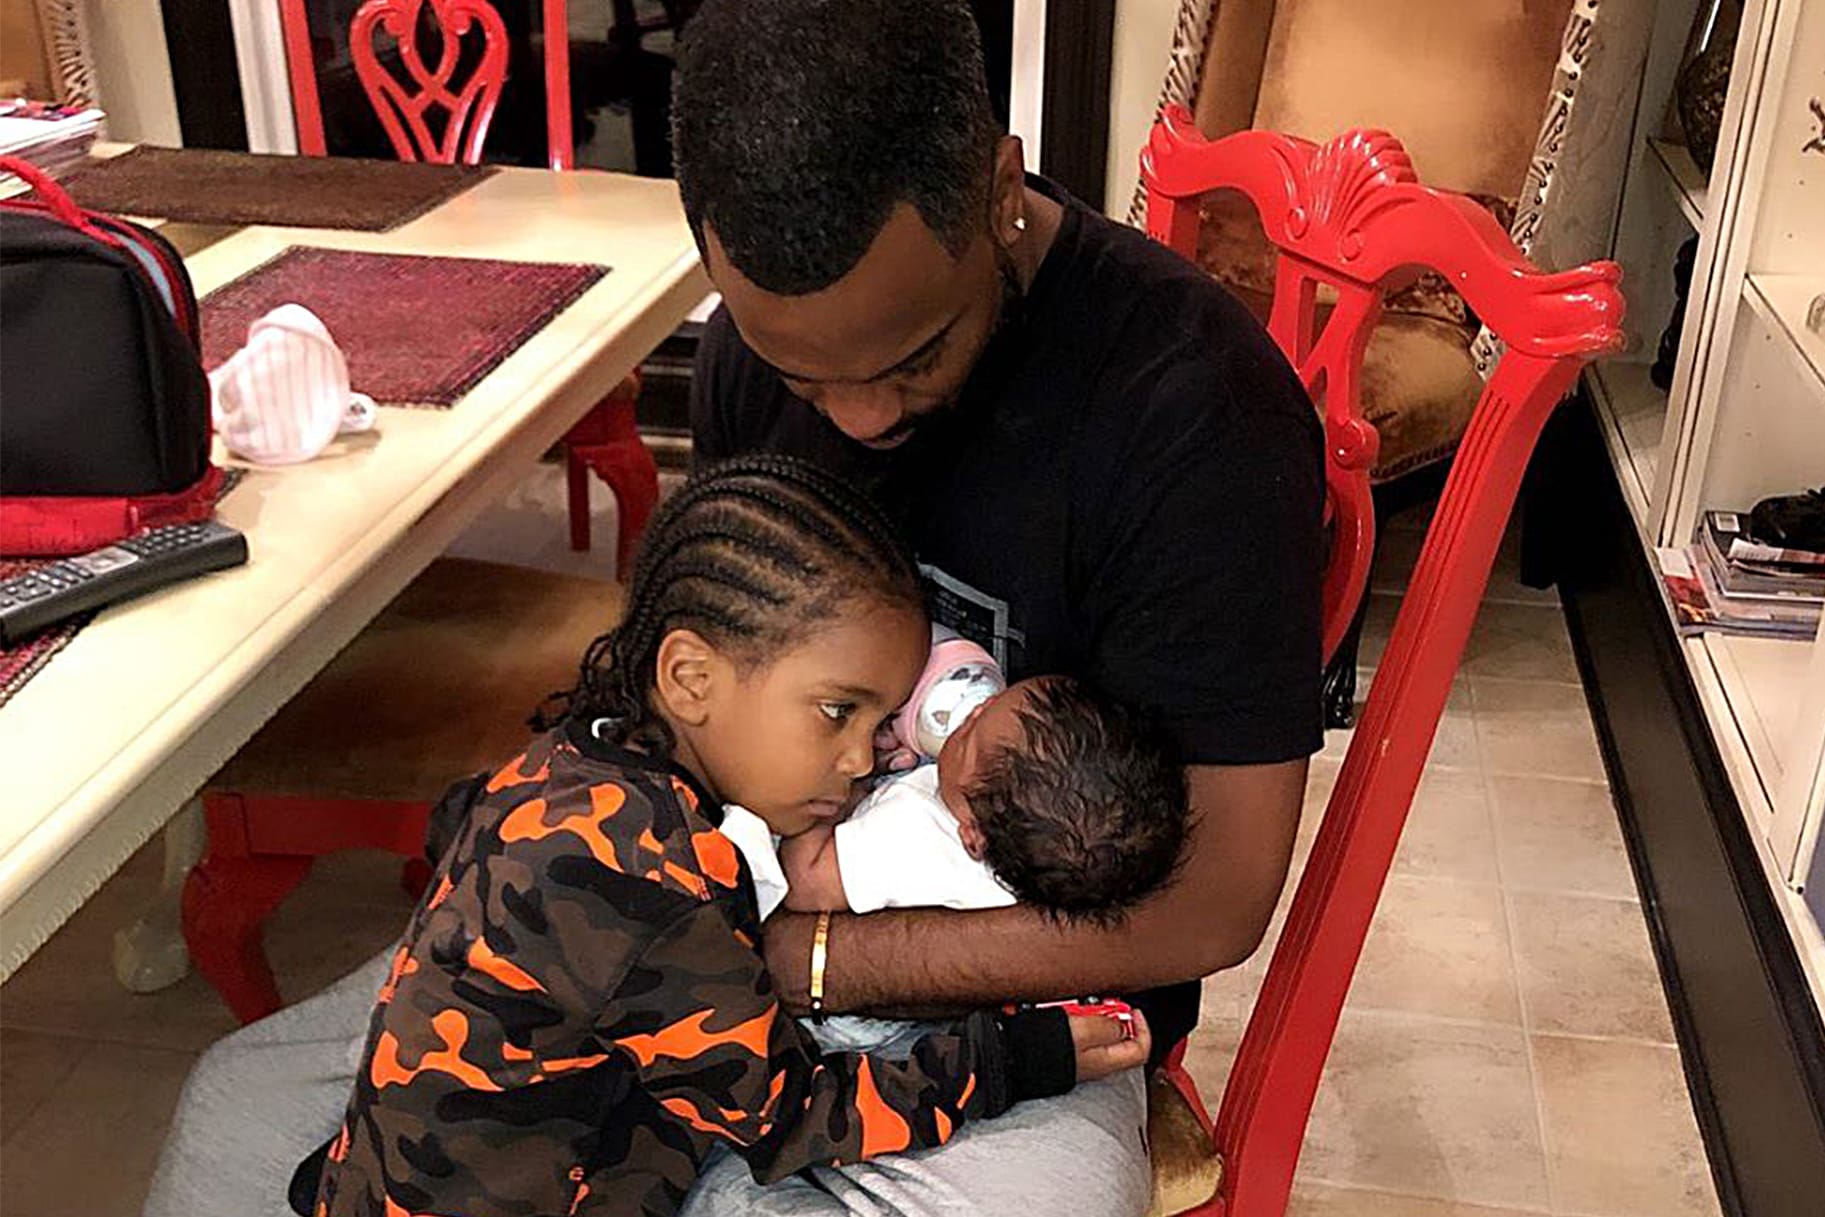 Kandi Burruss And Her Husband Todd Tucker Are Hanging Out At Home With Their Kids - See The Sweet Family Photo